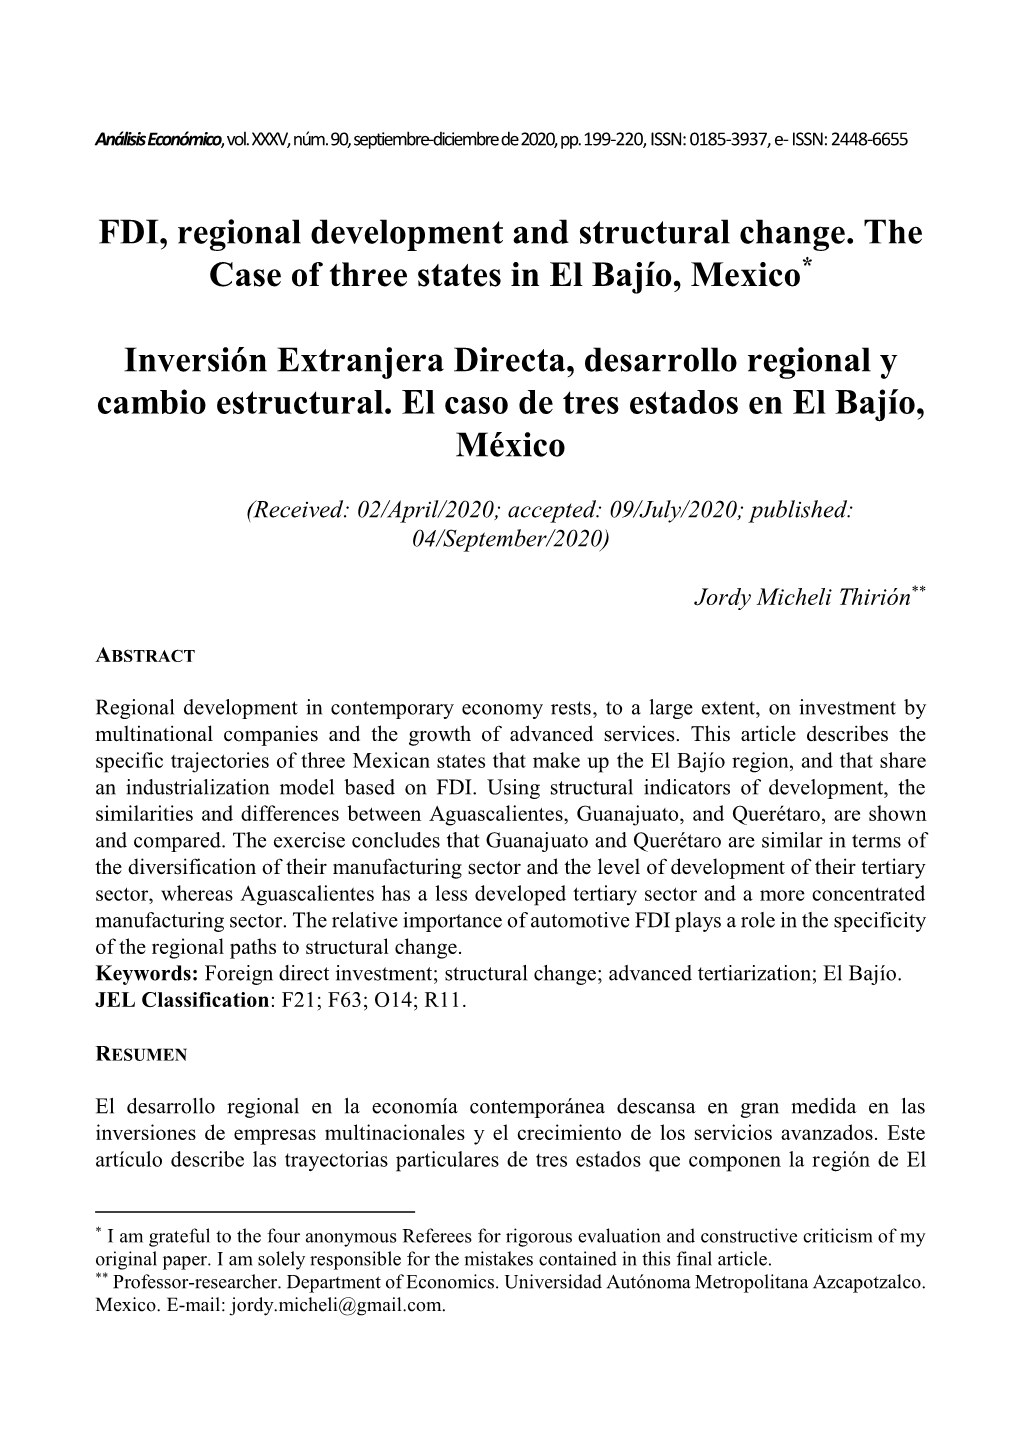 FDI, Regional Development and Structural Change. the Case of Three States in El Bajío, Mexico*